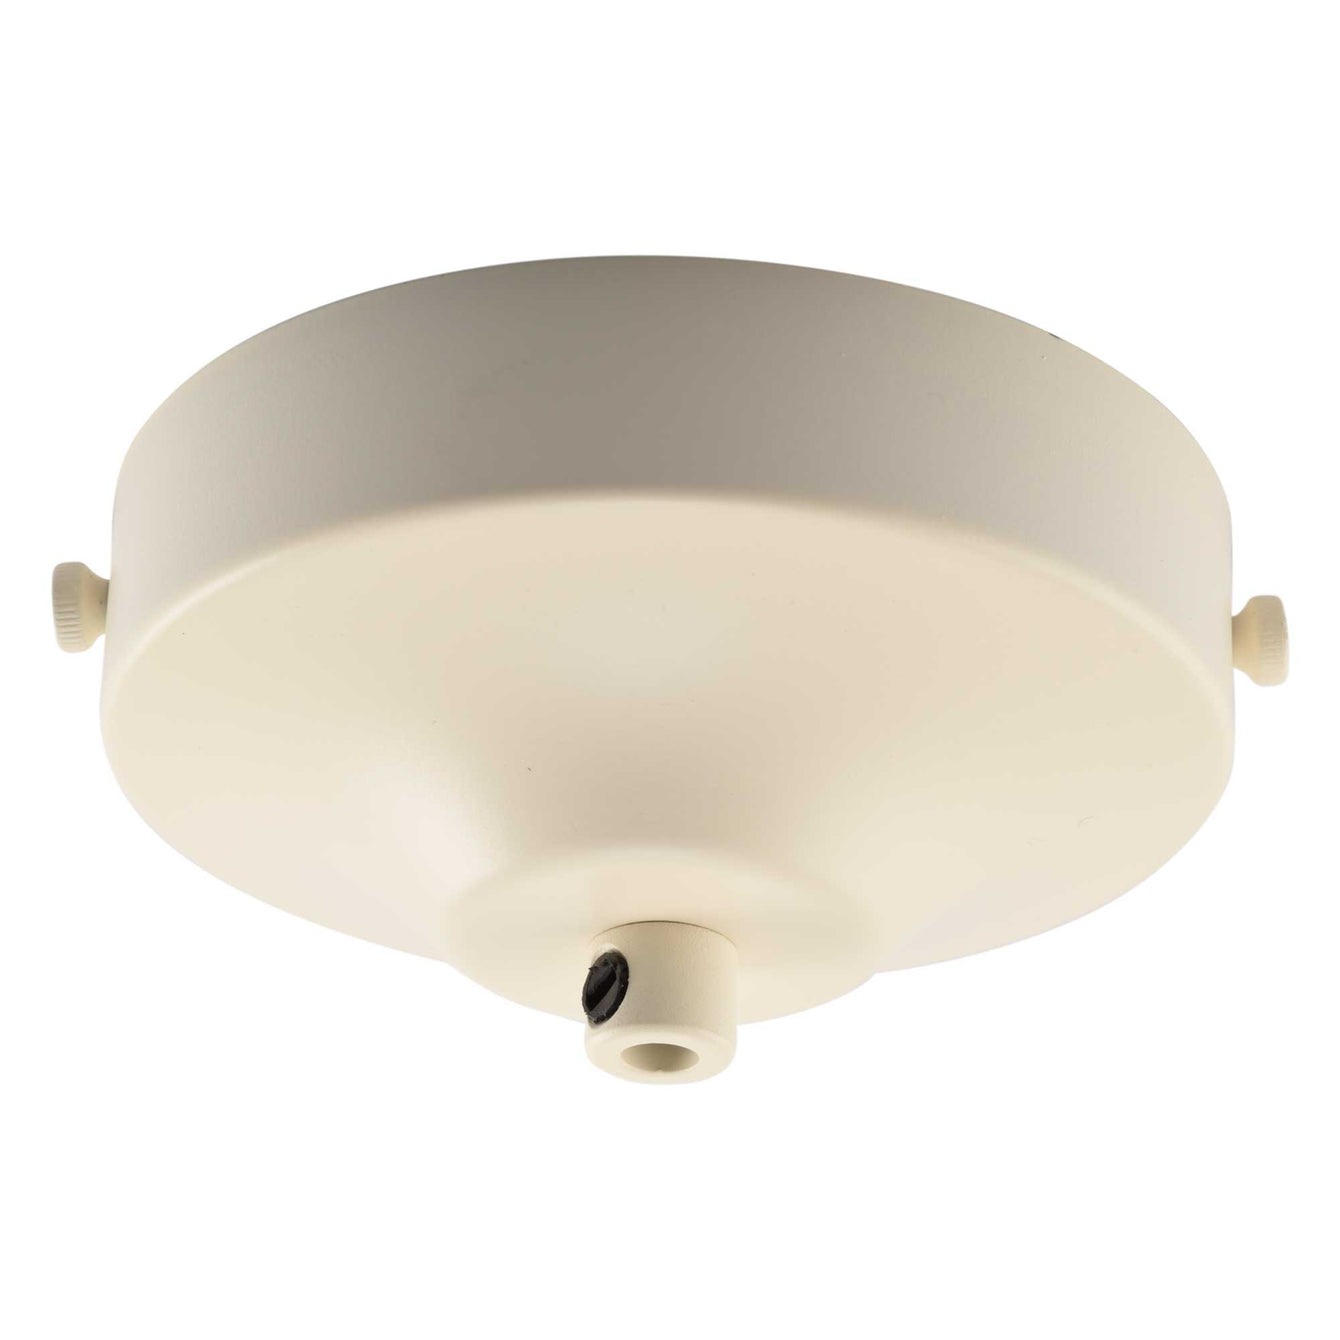 ElekTek 100mm Diameter Convex Ceiling Rose with Strap Bracket and Cord Grip Metallic Finishes Powder Coated Colours - Buy It Better 